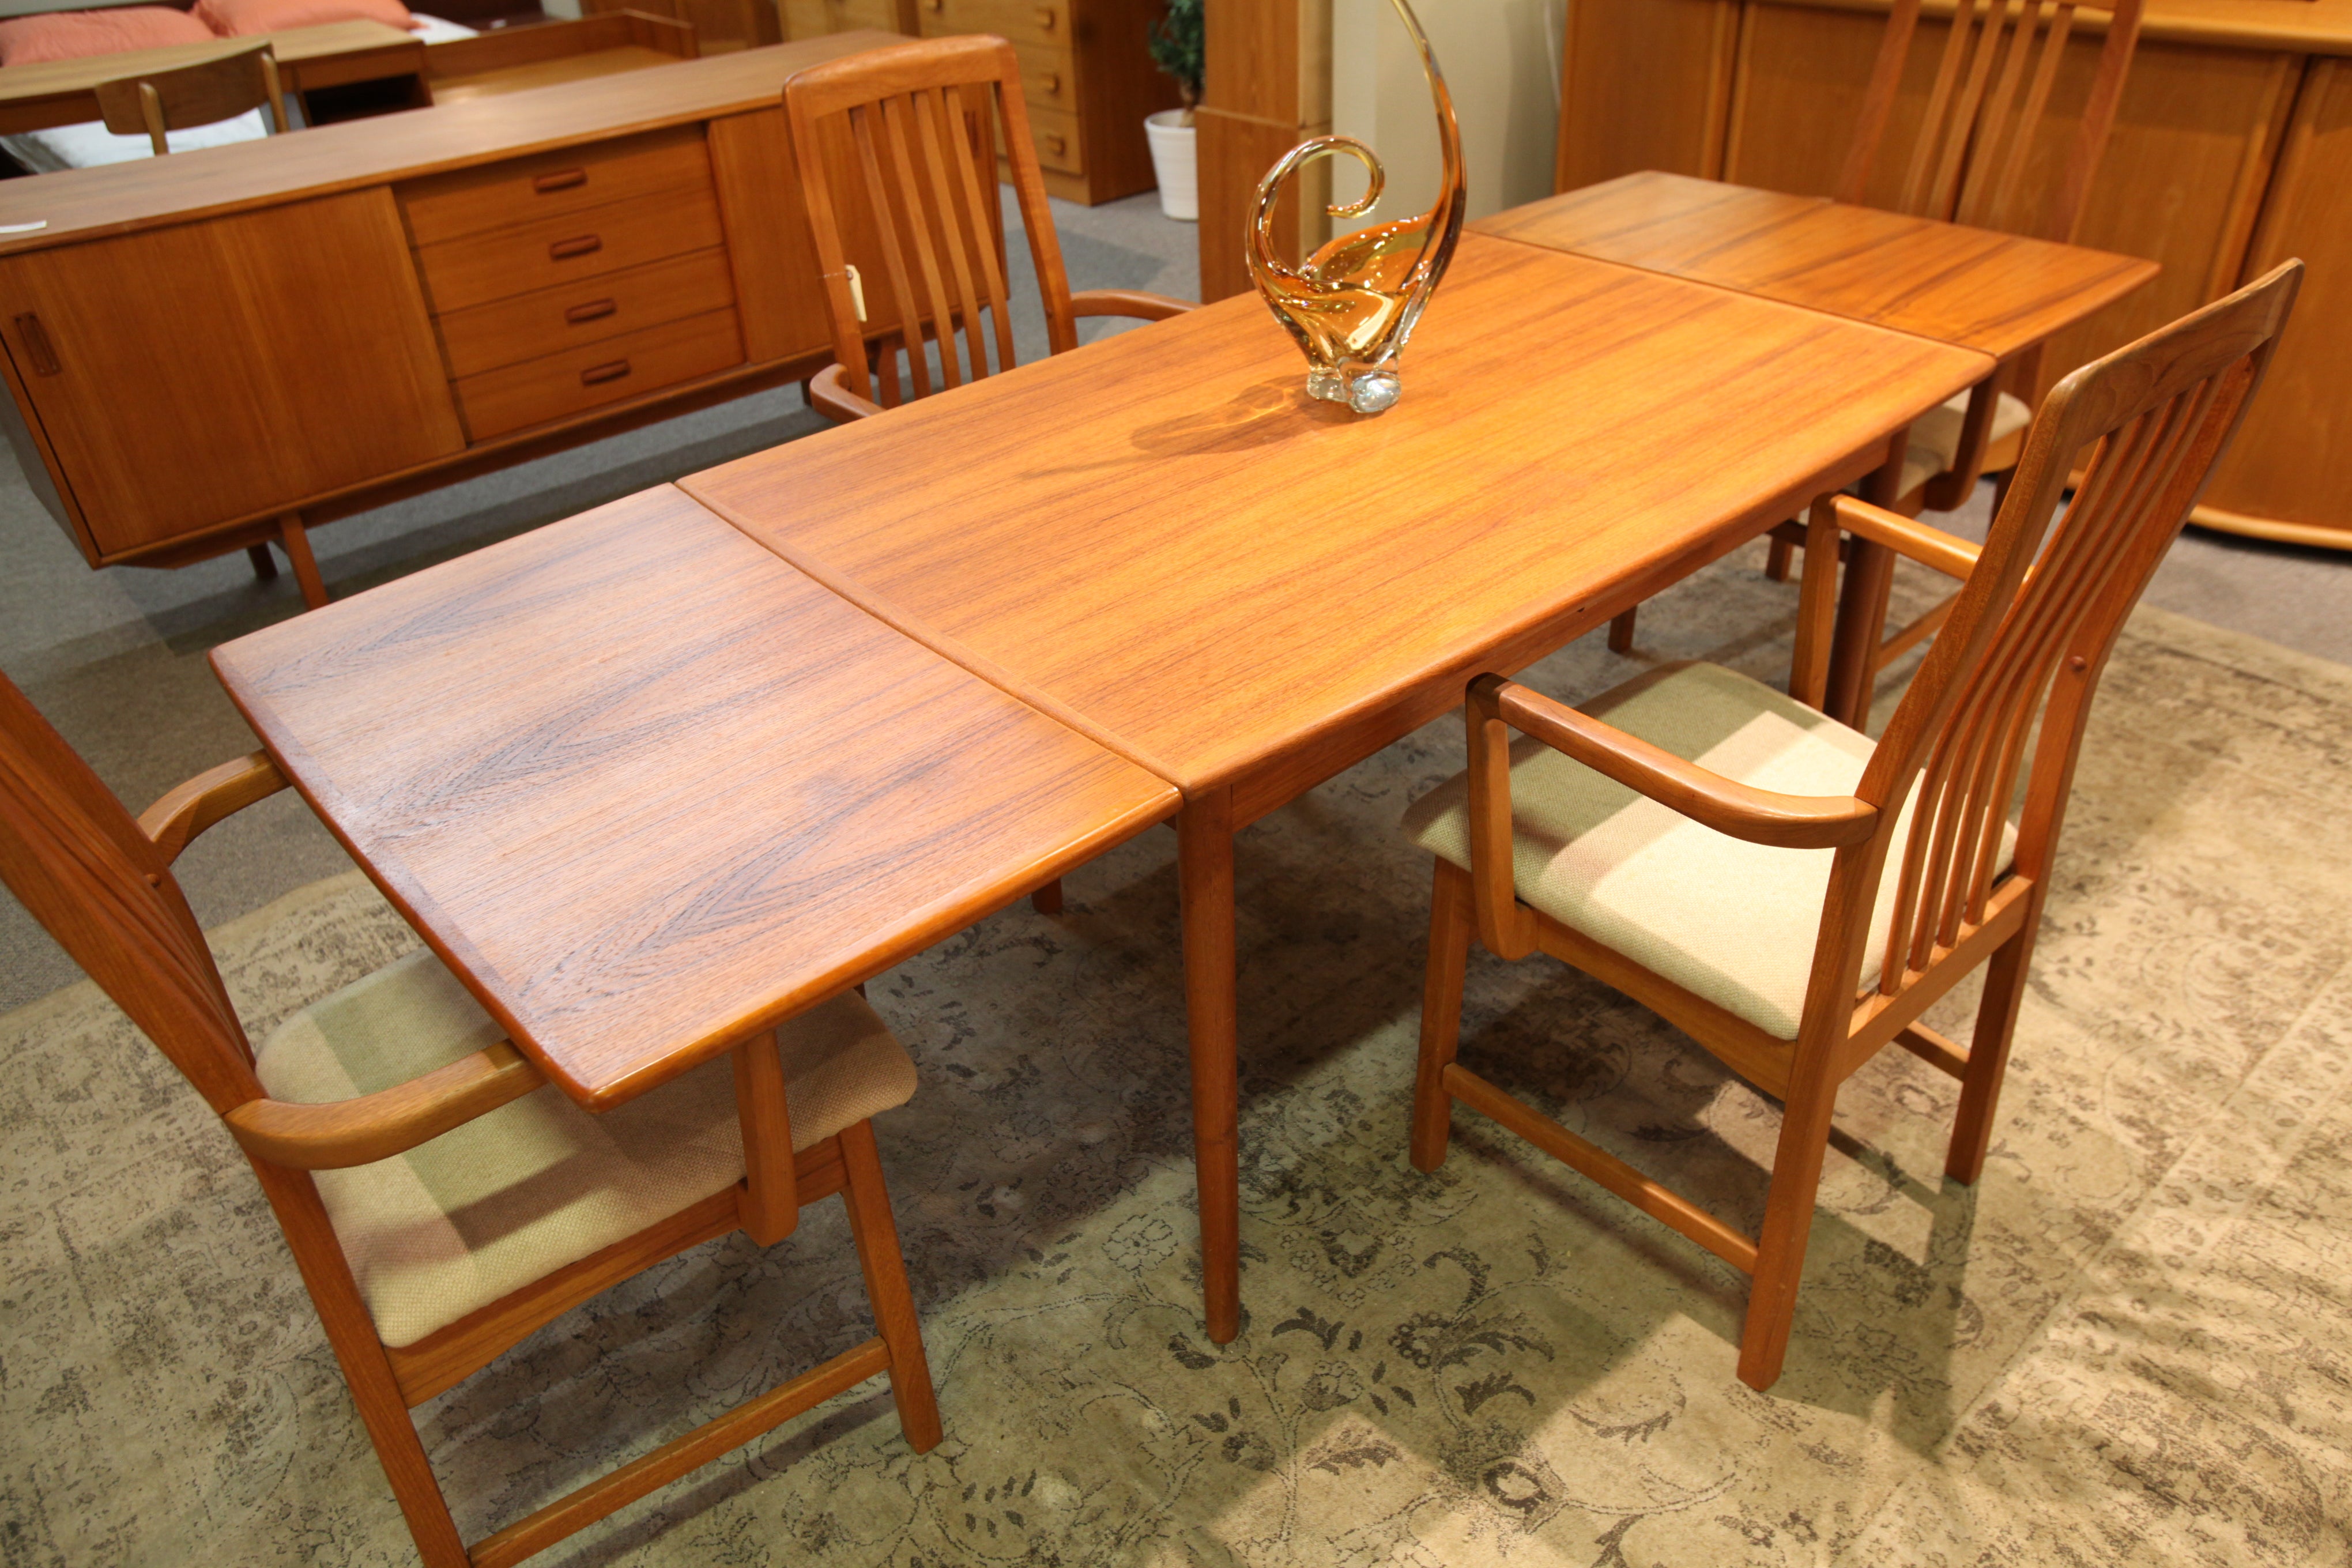 Vintage Danish Teak Extension Dining Table (48"x32"x28.75"H) or (84" x 32" x 28.75"H)